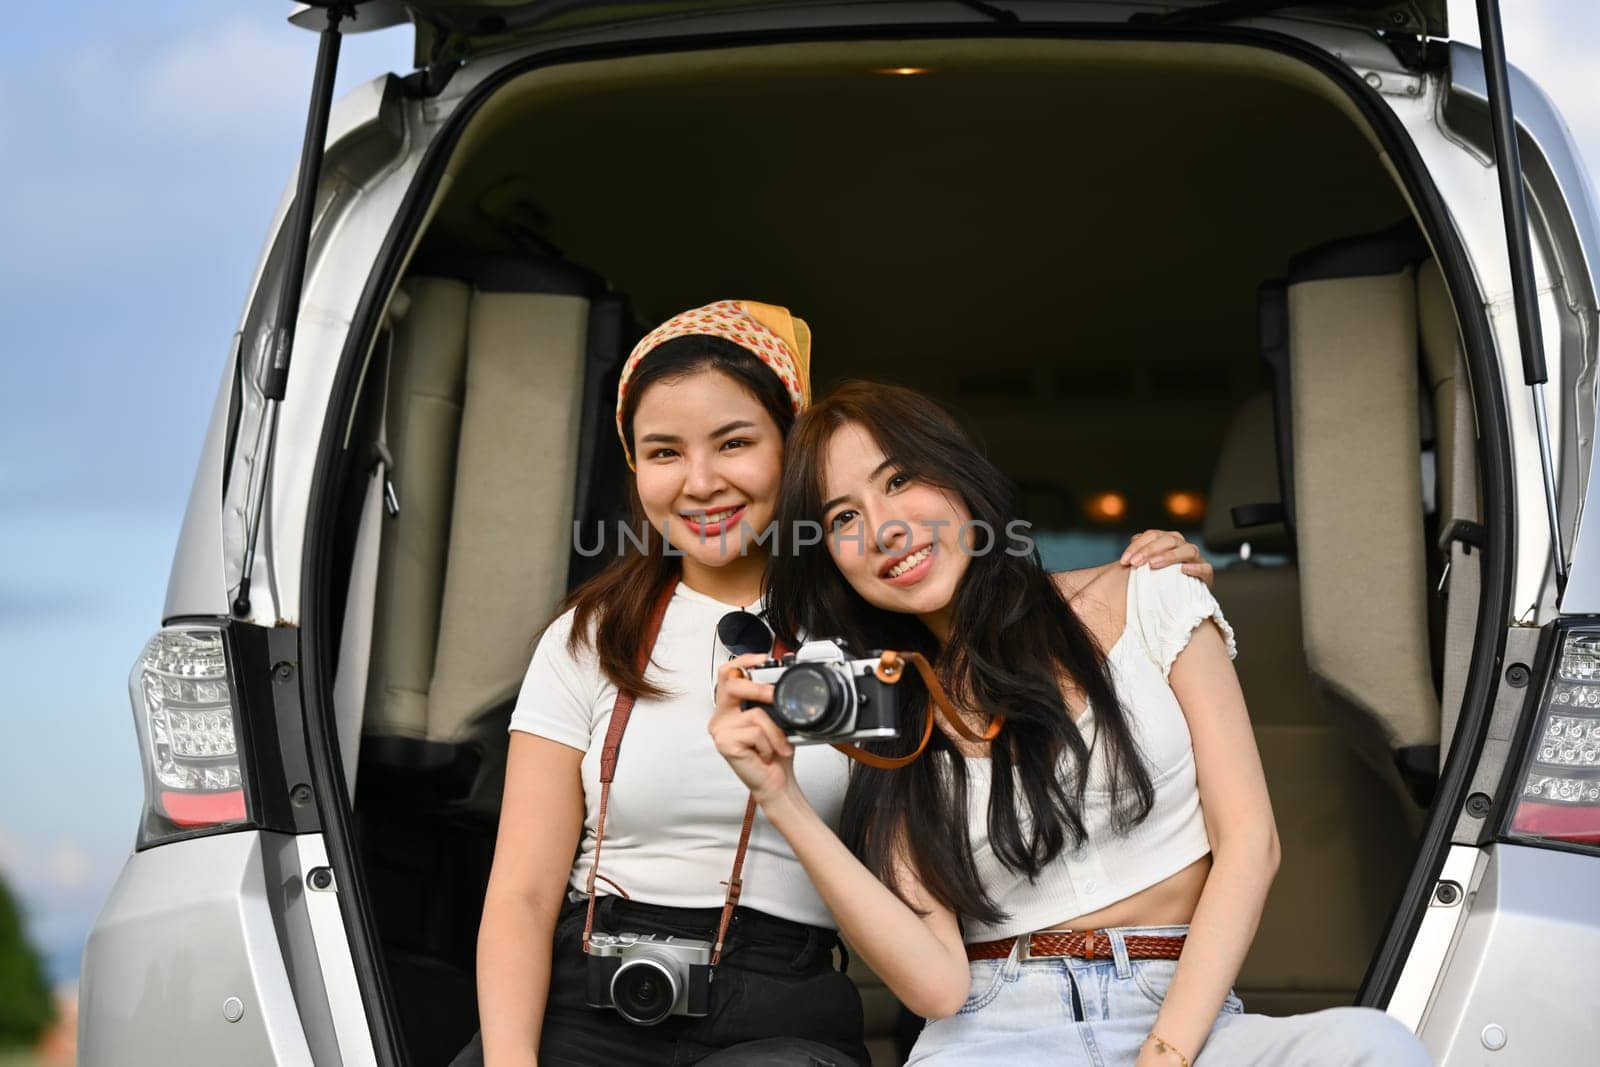 Two cheerful young women sitting on the open trunk of their car while taking a break from a road trip.